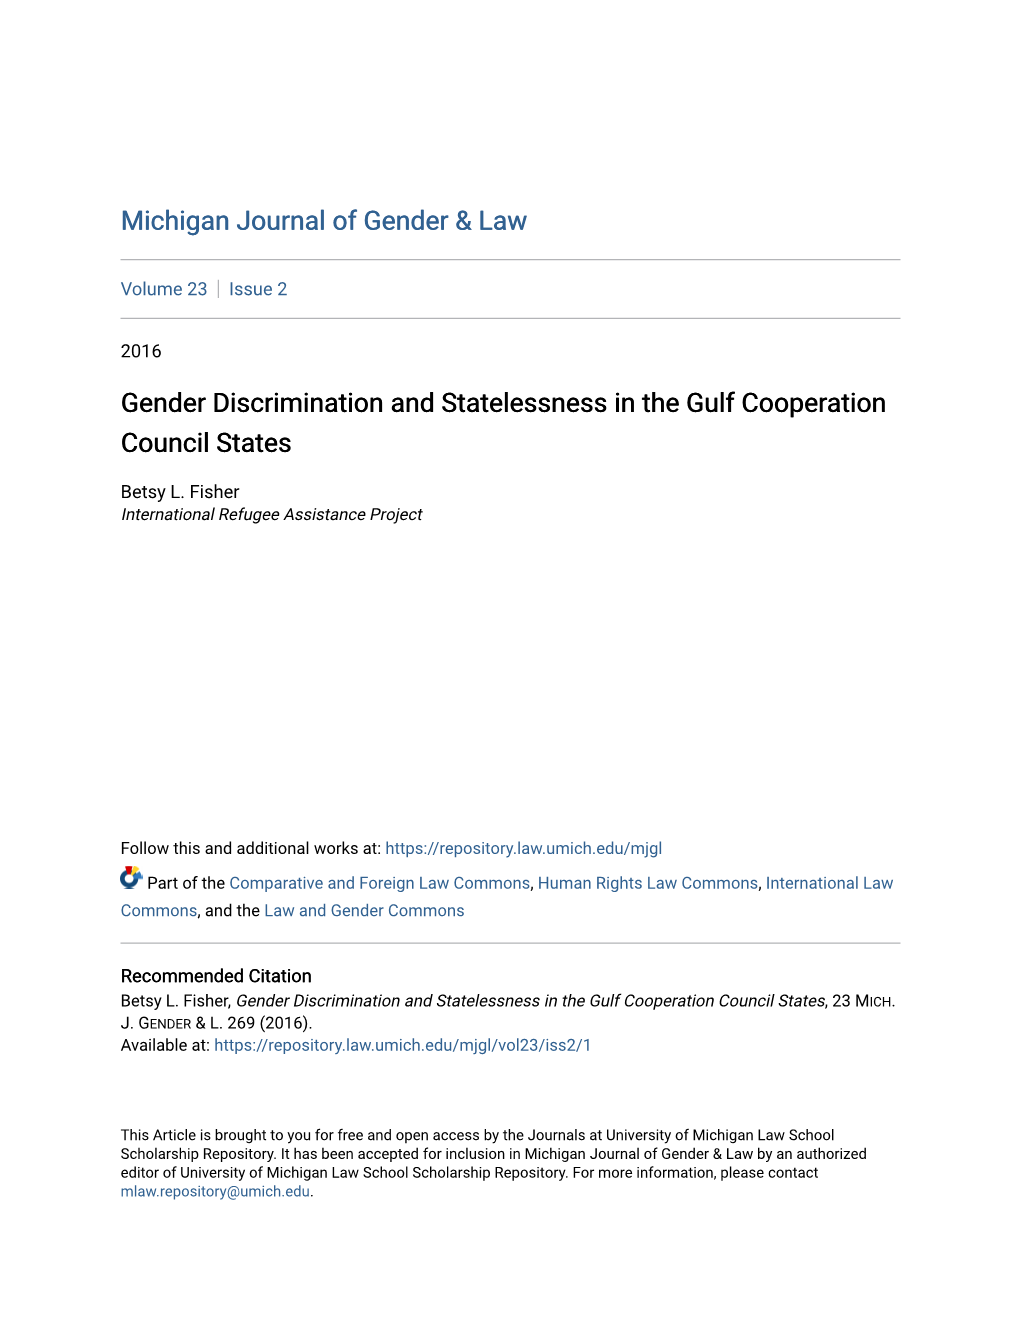 Gender Discrimination and Statelessness in the Gulf Cooperation Council States